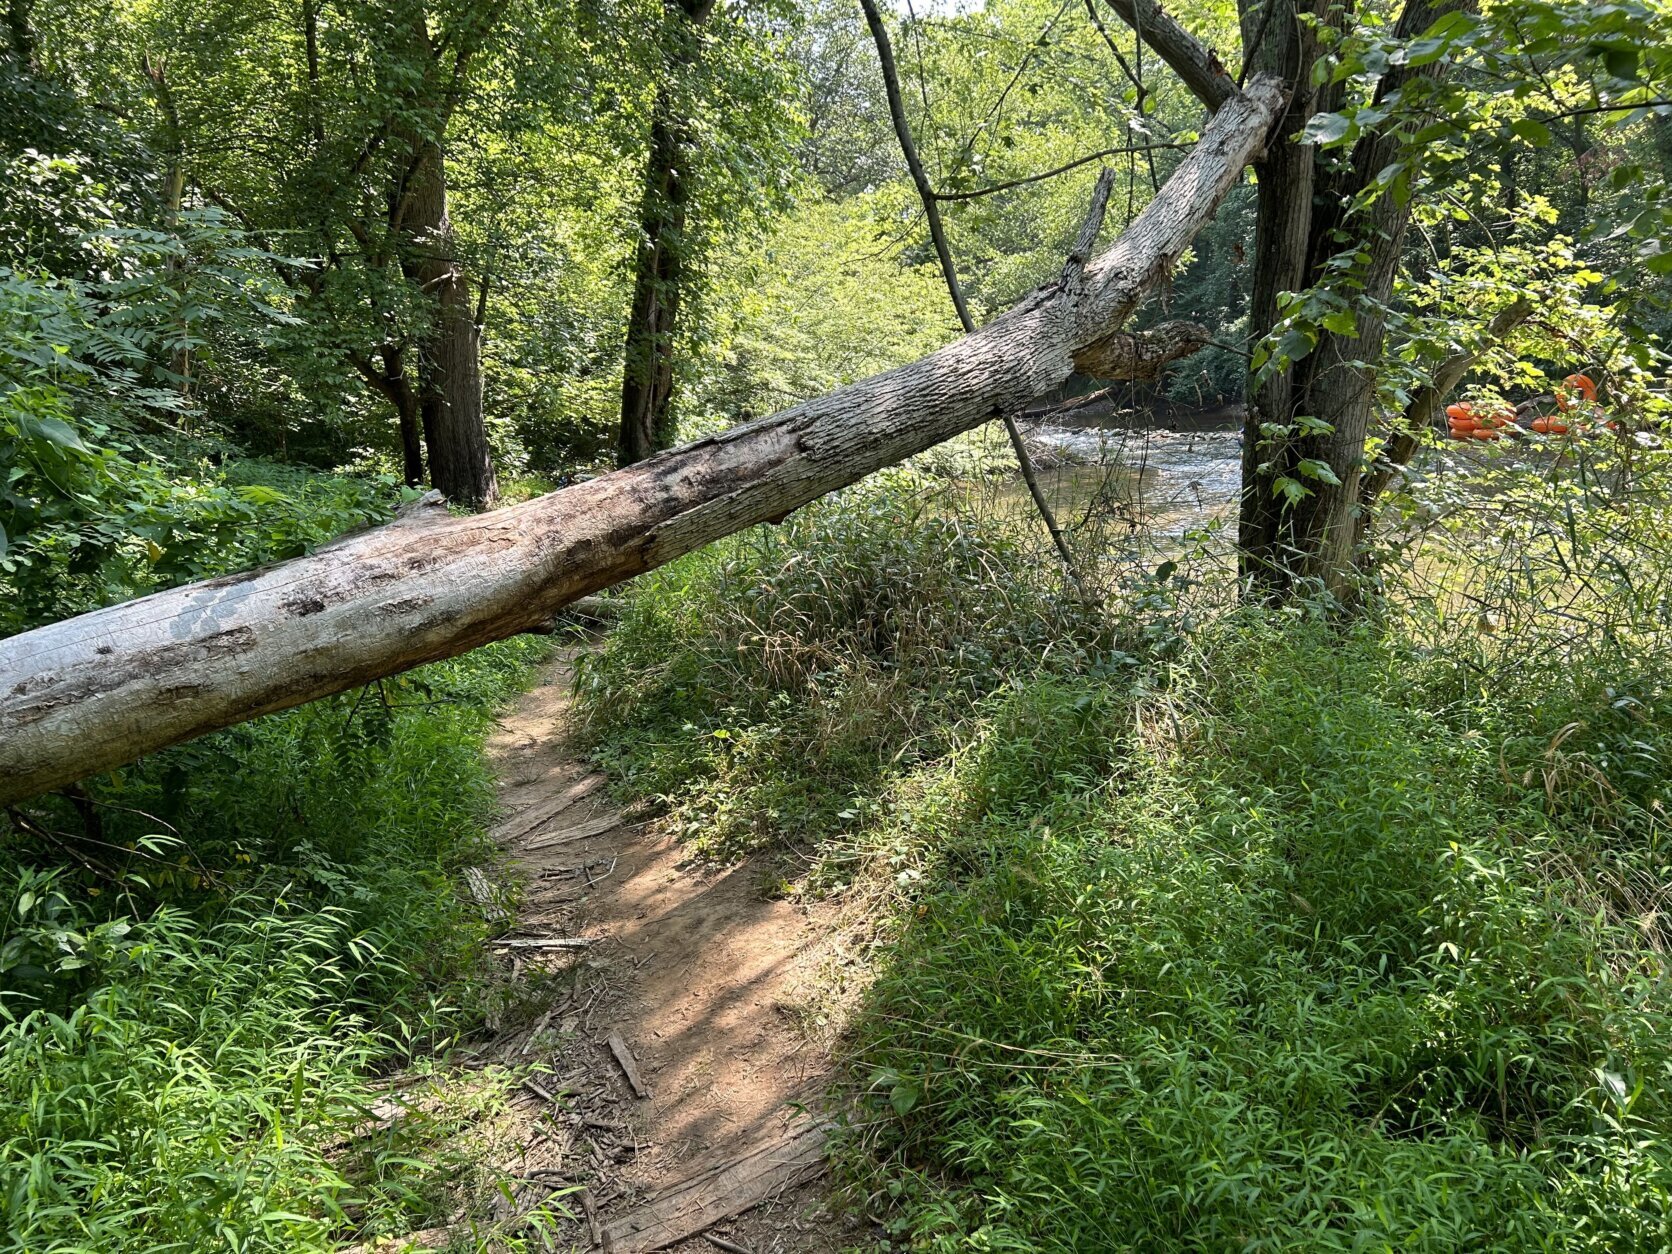 <p>Within a few hundred feet on the unmarked path, I could hear some gurgling water to my right. When I reached the point where a huge fallen tree blocked the path, with the shady creek in sight, it was worth it to bend down and try to propel my creaky body under the tree.</p>
<p>A few more feet, then a butt-scoot down a short, muddy path and there it was.</p>
<div><div style=""><style>#tnvbNcaMHUrl {margin-bottom: 10px;padding: 20px 10px;background: #D30000;text-align: center;font-weight: bold;color: #fff;border-radius: 5px;}.connatix_video_caption{margin-bottom: 30px; margin-top:0; font-size: 14px; color: #272828;  font-weight: 600; text-align: left; display:none;}</style>

<div style="display:block;min-width:100%;min-height:100px"><div id="tnvbNcaMHUrl" style="display:none;">This page contains a video which is being blocked by your ad blocker.<br>In order to view the video you must disable your ad blocker.</div><script id="cfe0a670a401490598d104d5c7b7d8fd">(new Image()).src = "https://capi.connatix.com/tr/si?token=9be9c680-c459-4acb-af21-654a2ccca384&cid=c2ffed0c-3624-46c0-b10f-97c976d290a3";cnx.cmd.push(function() {cnx({playerId: "9be9c680-c459-4acb-af21-654a2ccca384", mediaId: "3e0ebd6a-94e6-4b2a-a6c3-bf603c5dae1d"}).render("cfe0a670a401490598d104d5c7b7d8fd", function(renderError, playerApi) {if(!renderError && playerApi && typeof playerApi.getSize === "function") {var size = playerApi.getSize();var captionElement = document.querySelector(".connatix_video_caption");if(captionElement && size) {captionElement.style.width = size.width + "px";captionElement.style.display = "block";}}});});</script><div class='connatix_video_caption'></div></div></div></div>
<p>By walking maybe 20 steps, in water less than two feet deep, I was standing in the middle of some gentle &#8220;rapids&#8221; — flowing water strong enough to propel an inner-tube rider at a fun pace, but not strong enough to knock down a child (or a rickety 64-year-old reporter).</p>
<p>Heading toward the River Road overpass, the water gets a bit deeper, with less of a current. Had I brought my bathing suit, maybe I would have sat down to enjoy the cool water. By the way, bring water shoes or an old pair of sneakers, since the creek bed is rocky and slightly slippery.</p>
<blockquote class="twitter-tweet tw-align-center">
<p dir="ltr" lang="en">Uh-oh, the secret’s out. I’ll tell you where to find this swimming hole on wtop-dot-com, and 103.5FM <a href="https://t.co/FtjQ1qJXYE">pic.twitter.com/FtjQ1qJXYE</a></p>
<p>— Neal Augenstein (@AugensteinWTOP) <a href="https://twitter.com/AugensteinWTOP/status/1685011767817076737?ref_src=twsrc%5Etfw">July 28, 2023</a></p></blockquote>
<p><script async src="https://platform.twitter.com/widgets.js" charset="utf-8"></script></p>
<p>Finding silent solitude may require a visit during &#8220;off-peak&#8221; hours. During my late-morning visit, I saw some kids with tubes, and others with canoes, so I was lucky to have the entire creek to myself for a while.</p>
<p>No reservations needed.</p>
